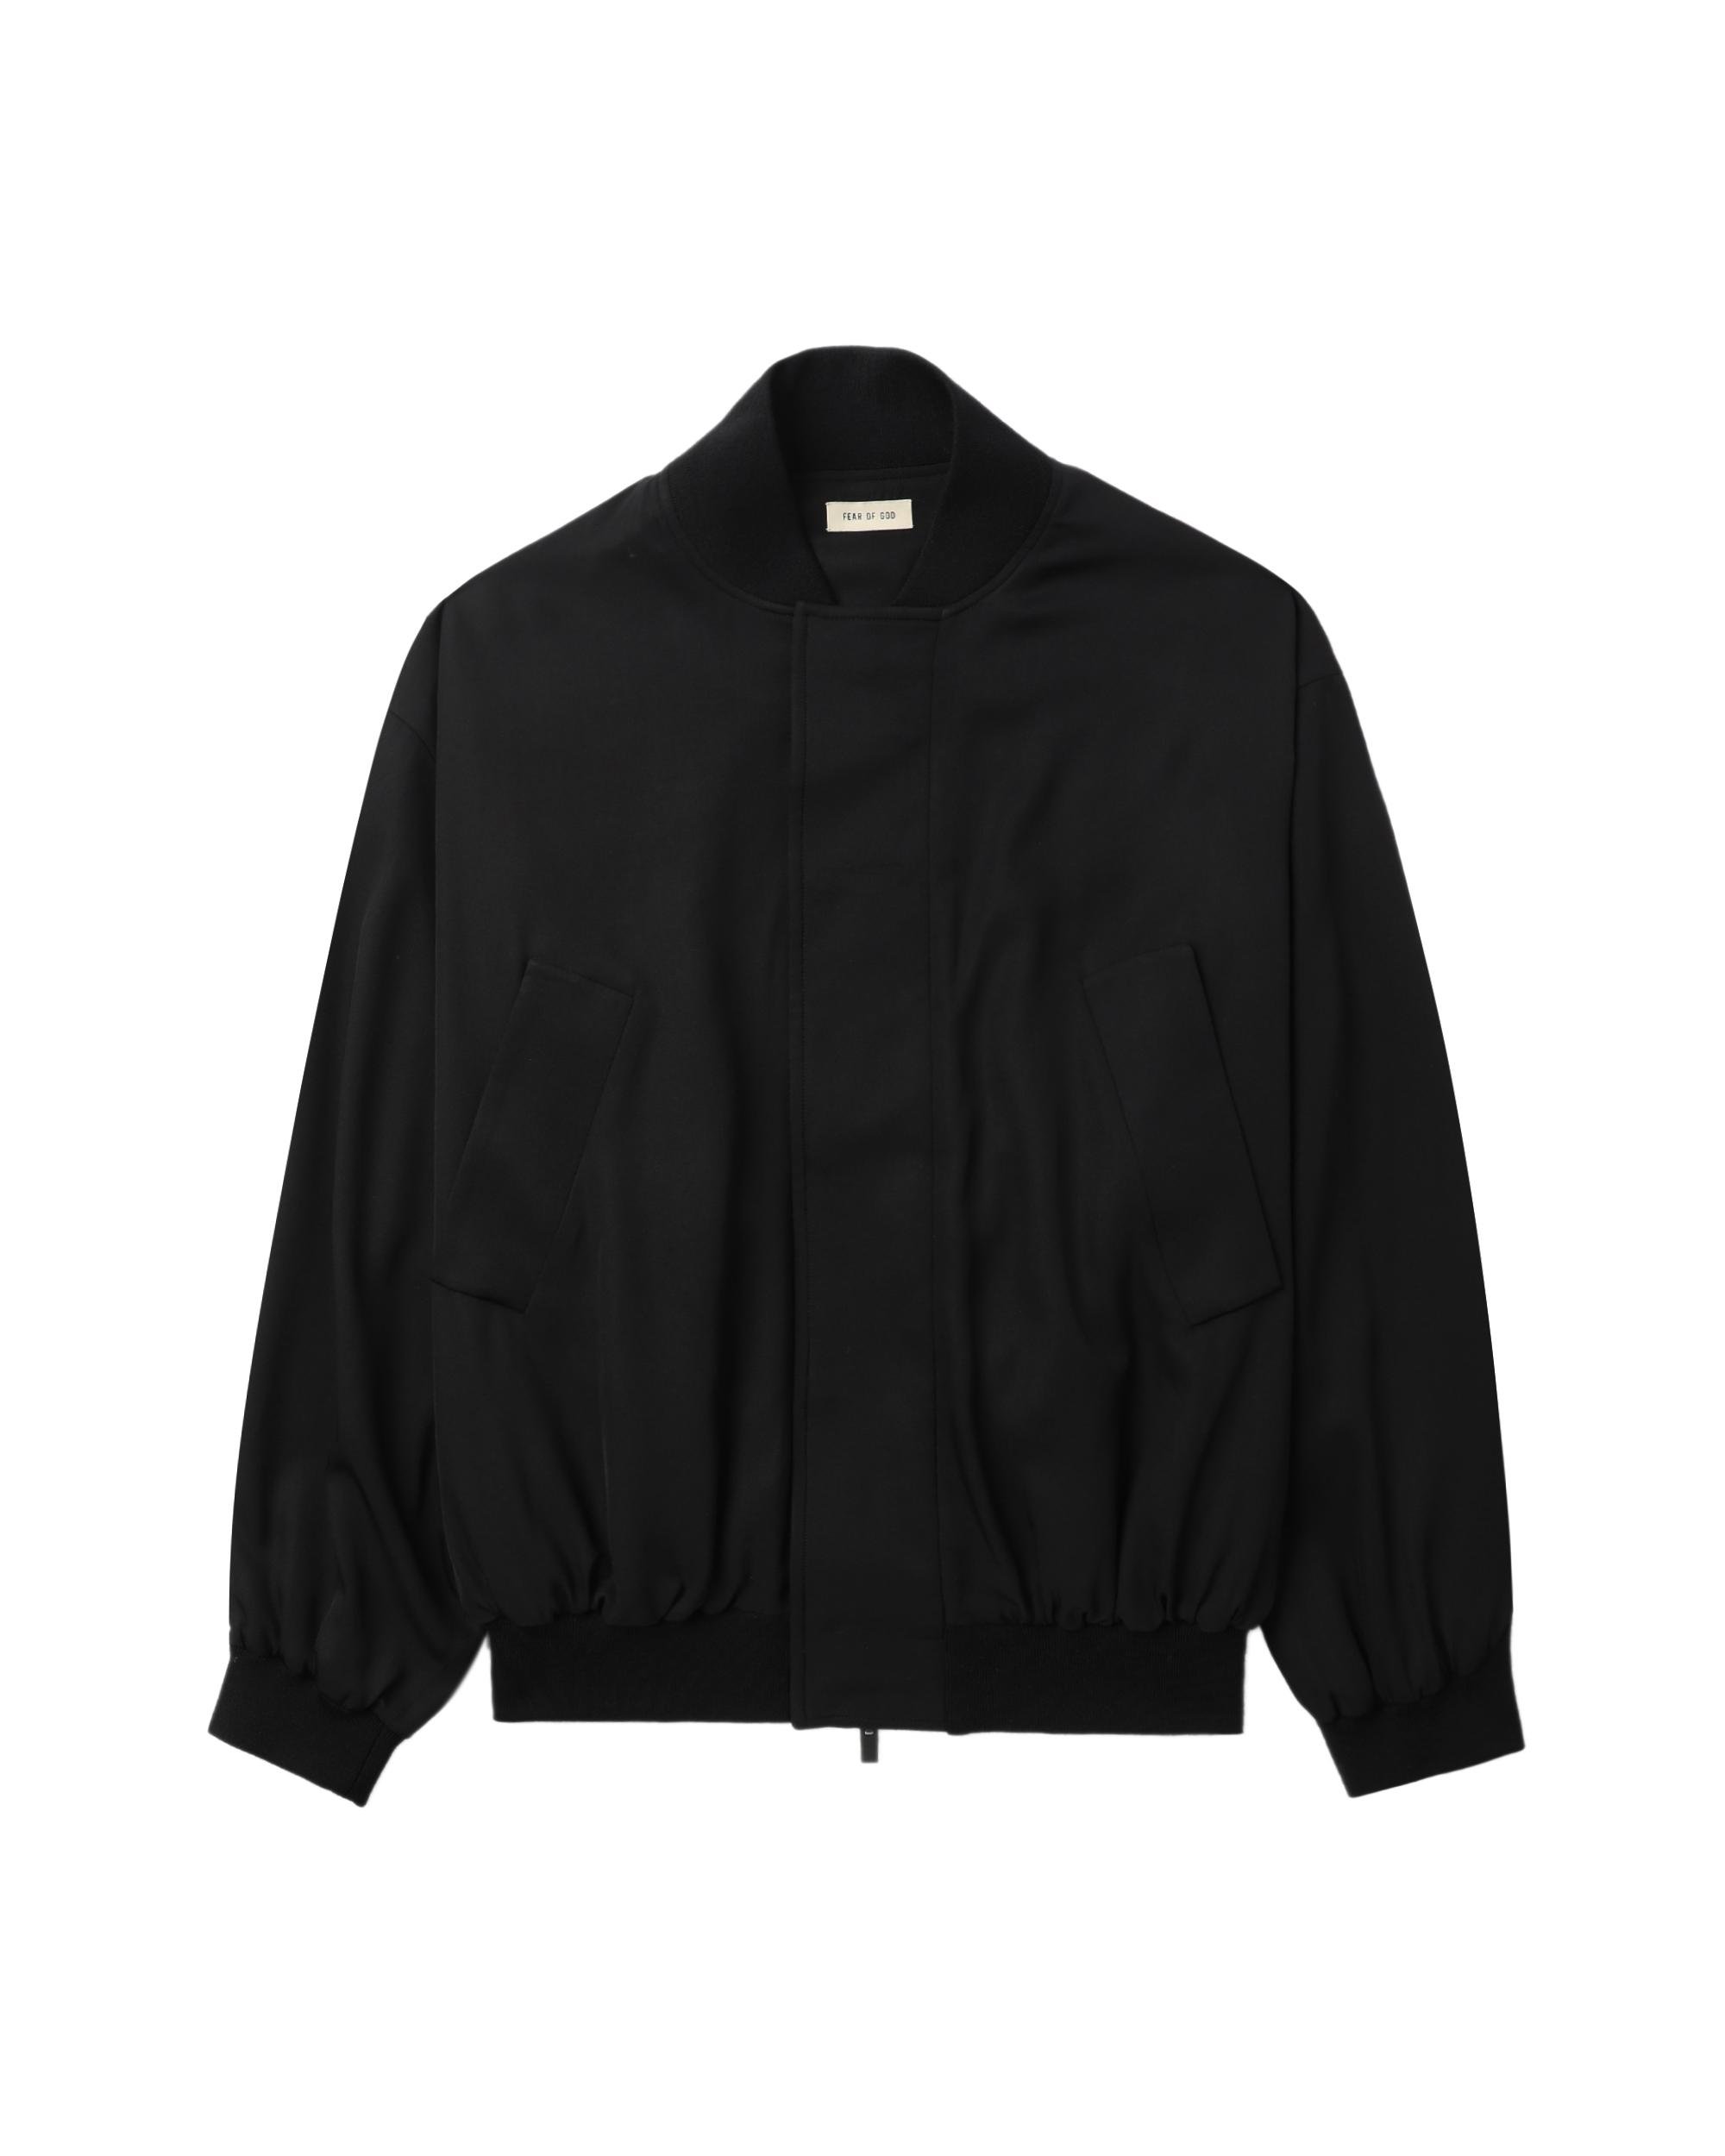 Double-layer bomber by FEAR OF GOD